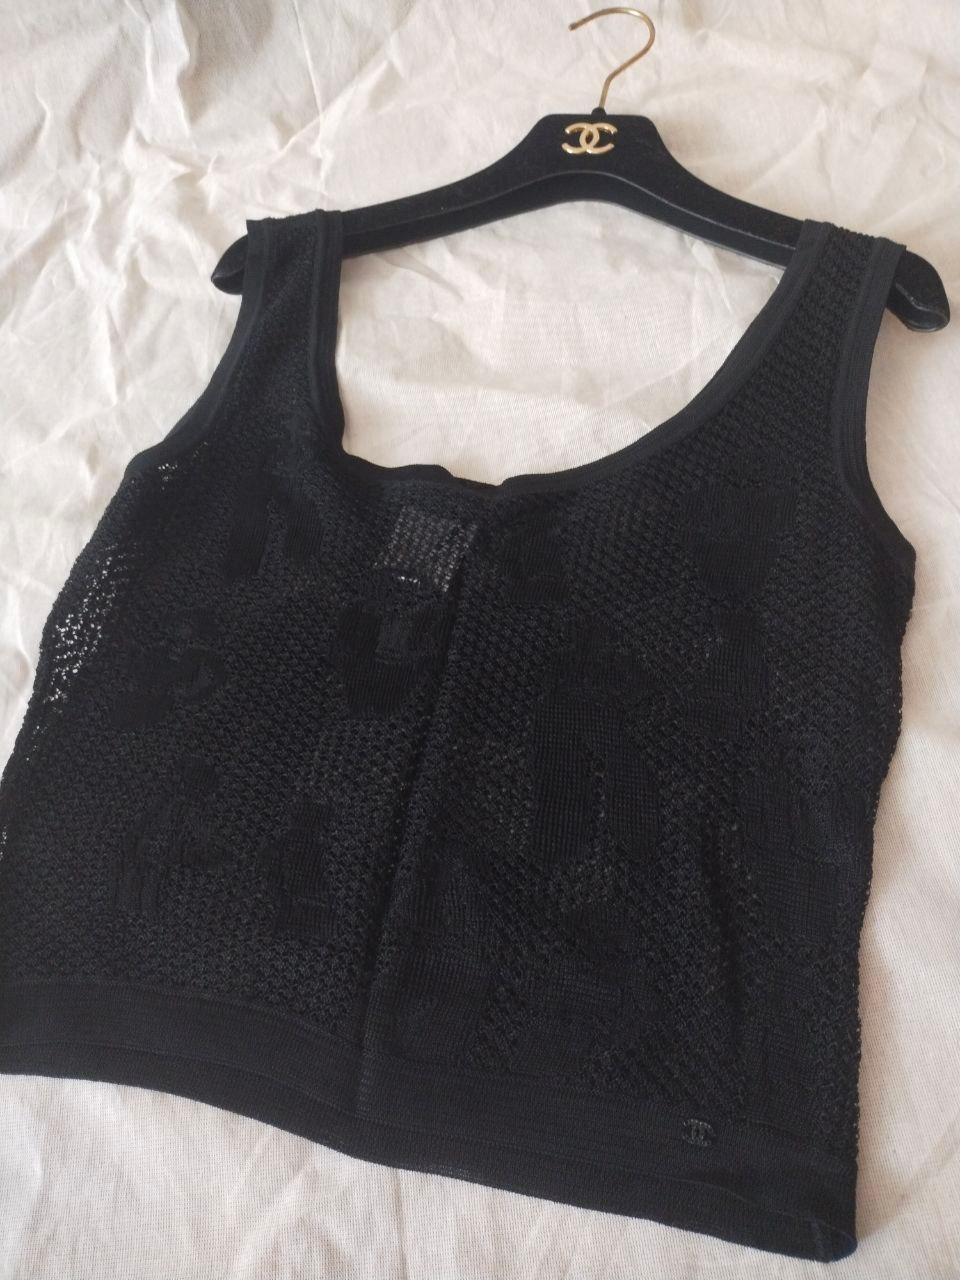 CHANEL & Karl Lagerfeld 03P 2003 Spring most wanted iconic very rare top y2k  For Sale 8